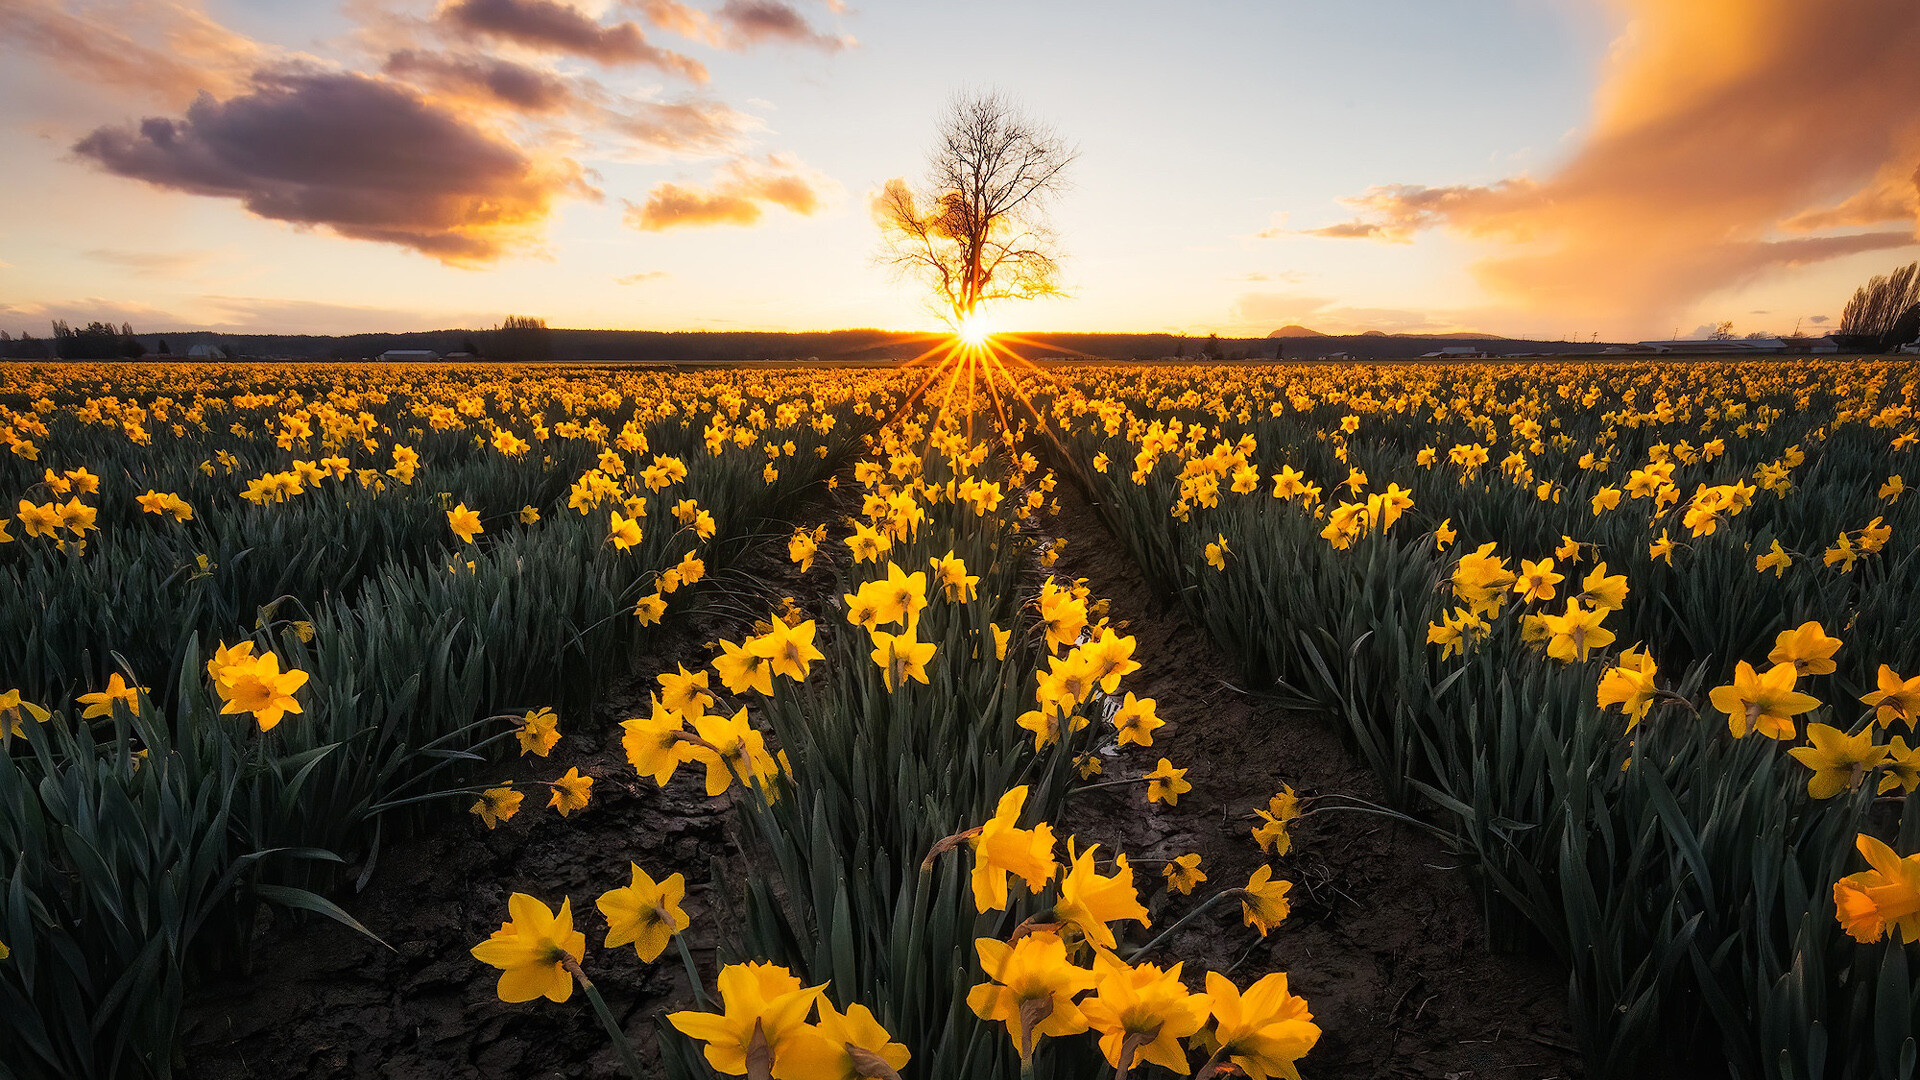 Daffodil: The distinctive flowers have six petal-like tepals, surrounding a central trumpet or corona, Scenery. 1920x1080 Full HD Background.